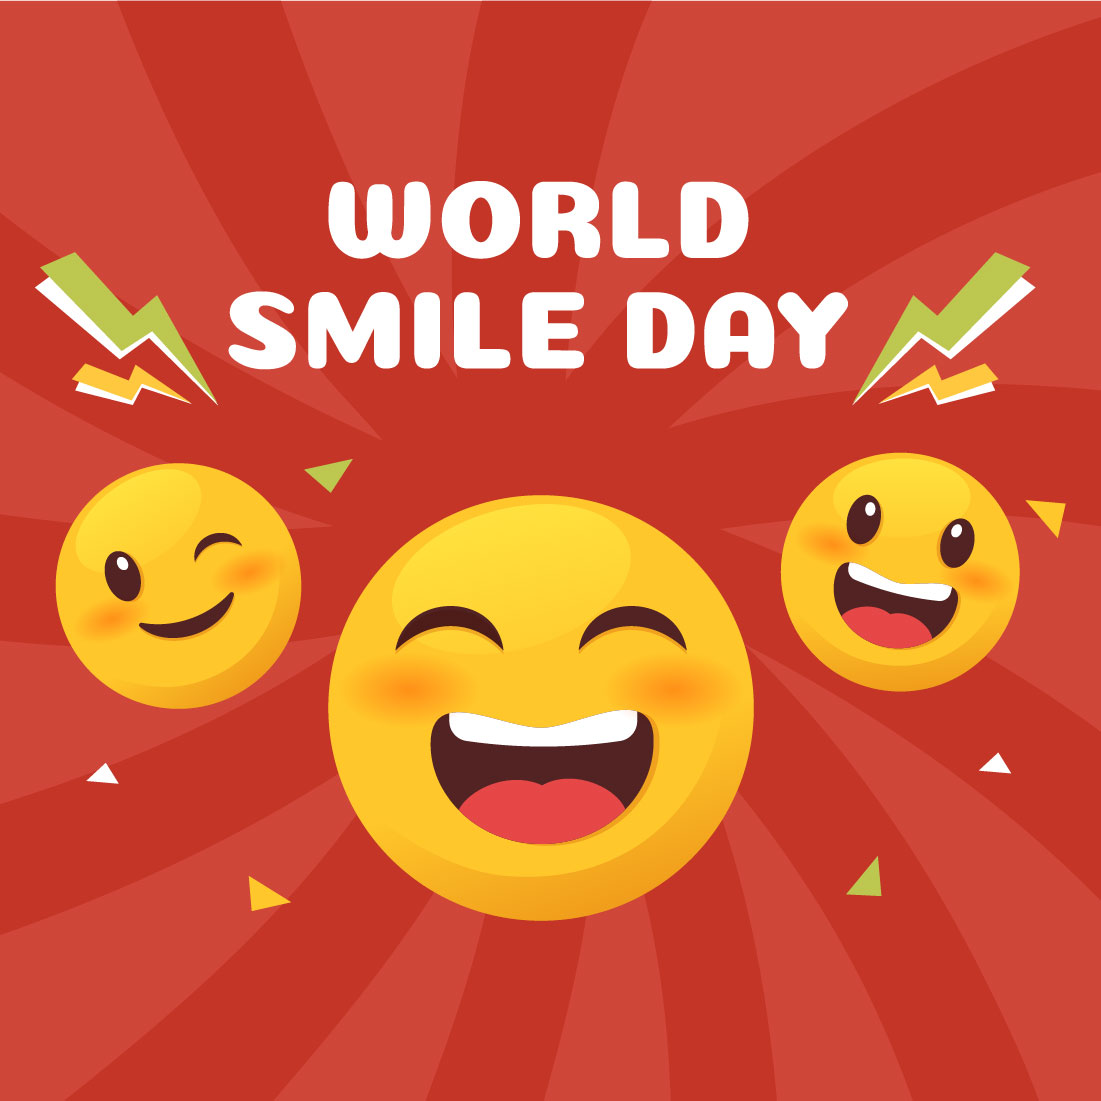 17 World Smile Day Illustration preview image.